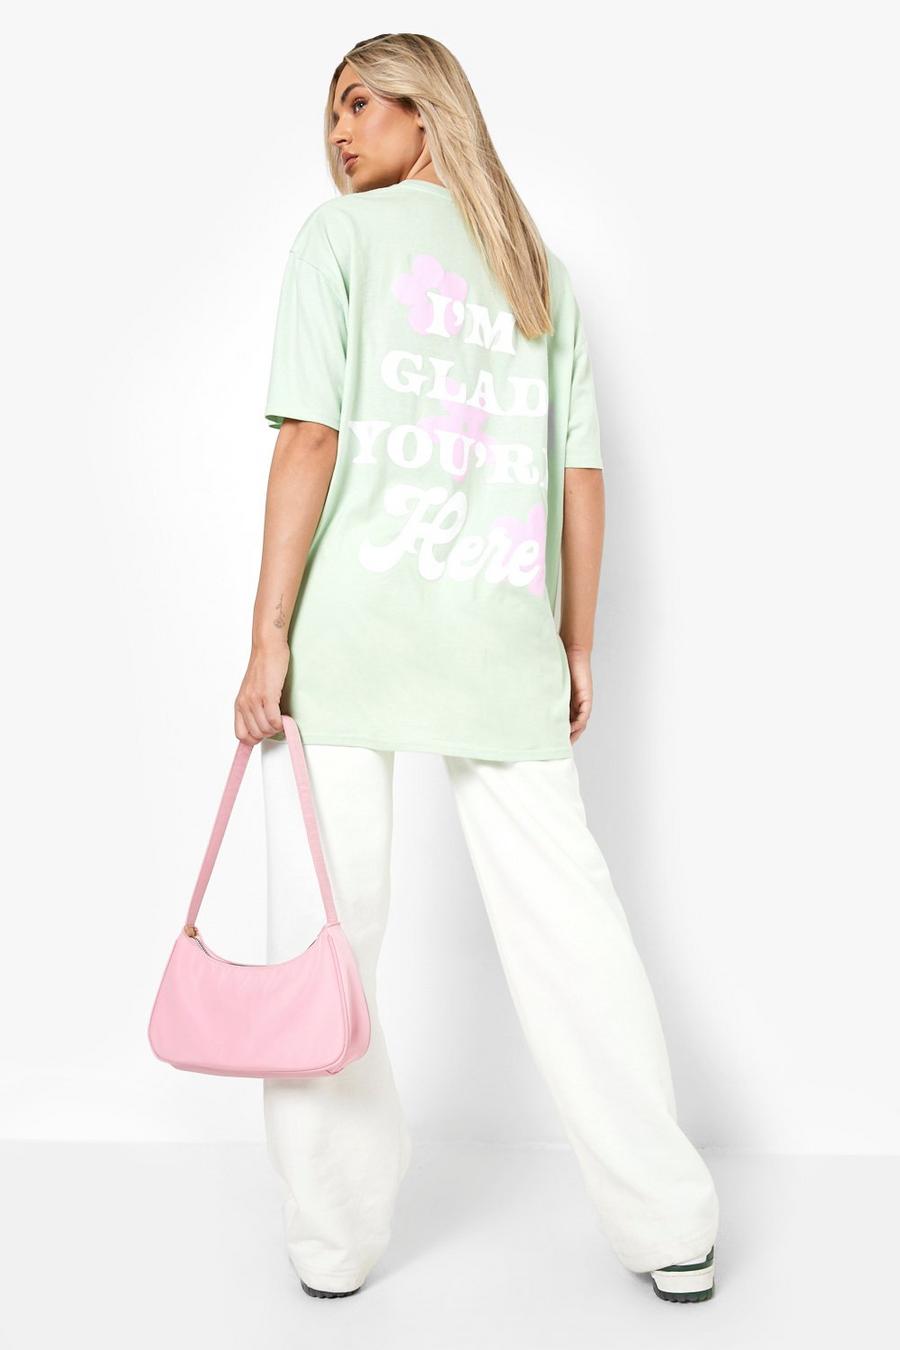 Glad You're Here Printed Oversized T Shirt: Apple Green